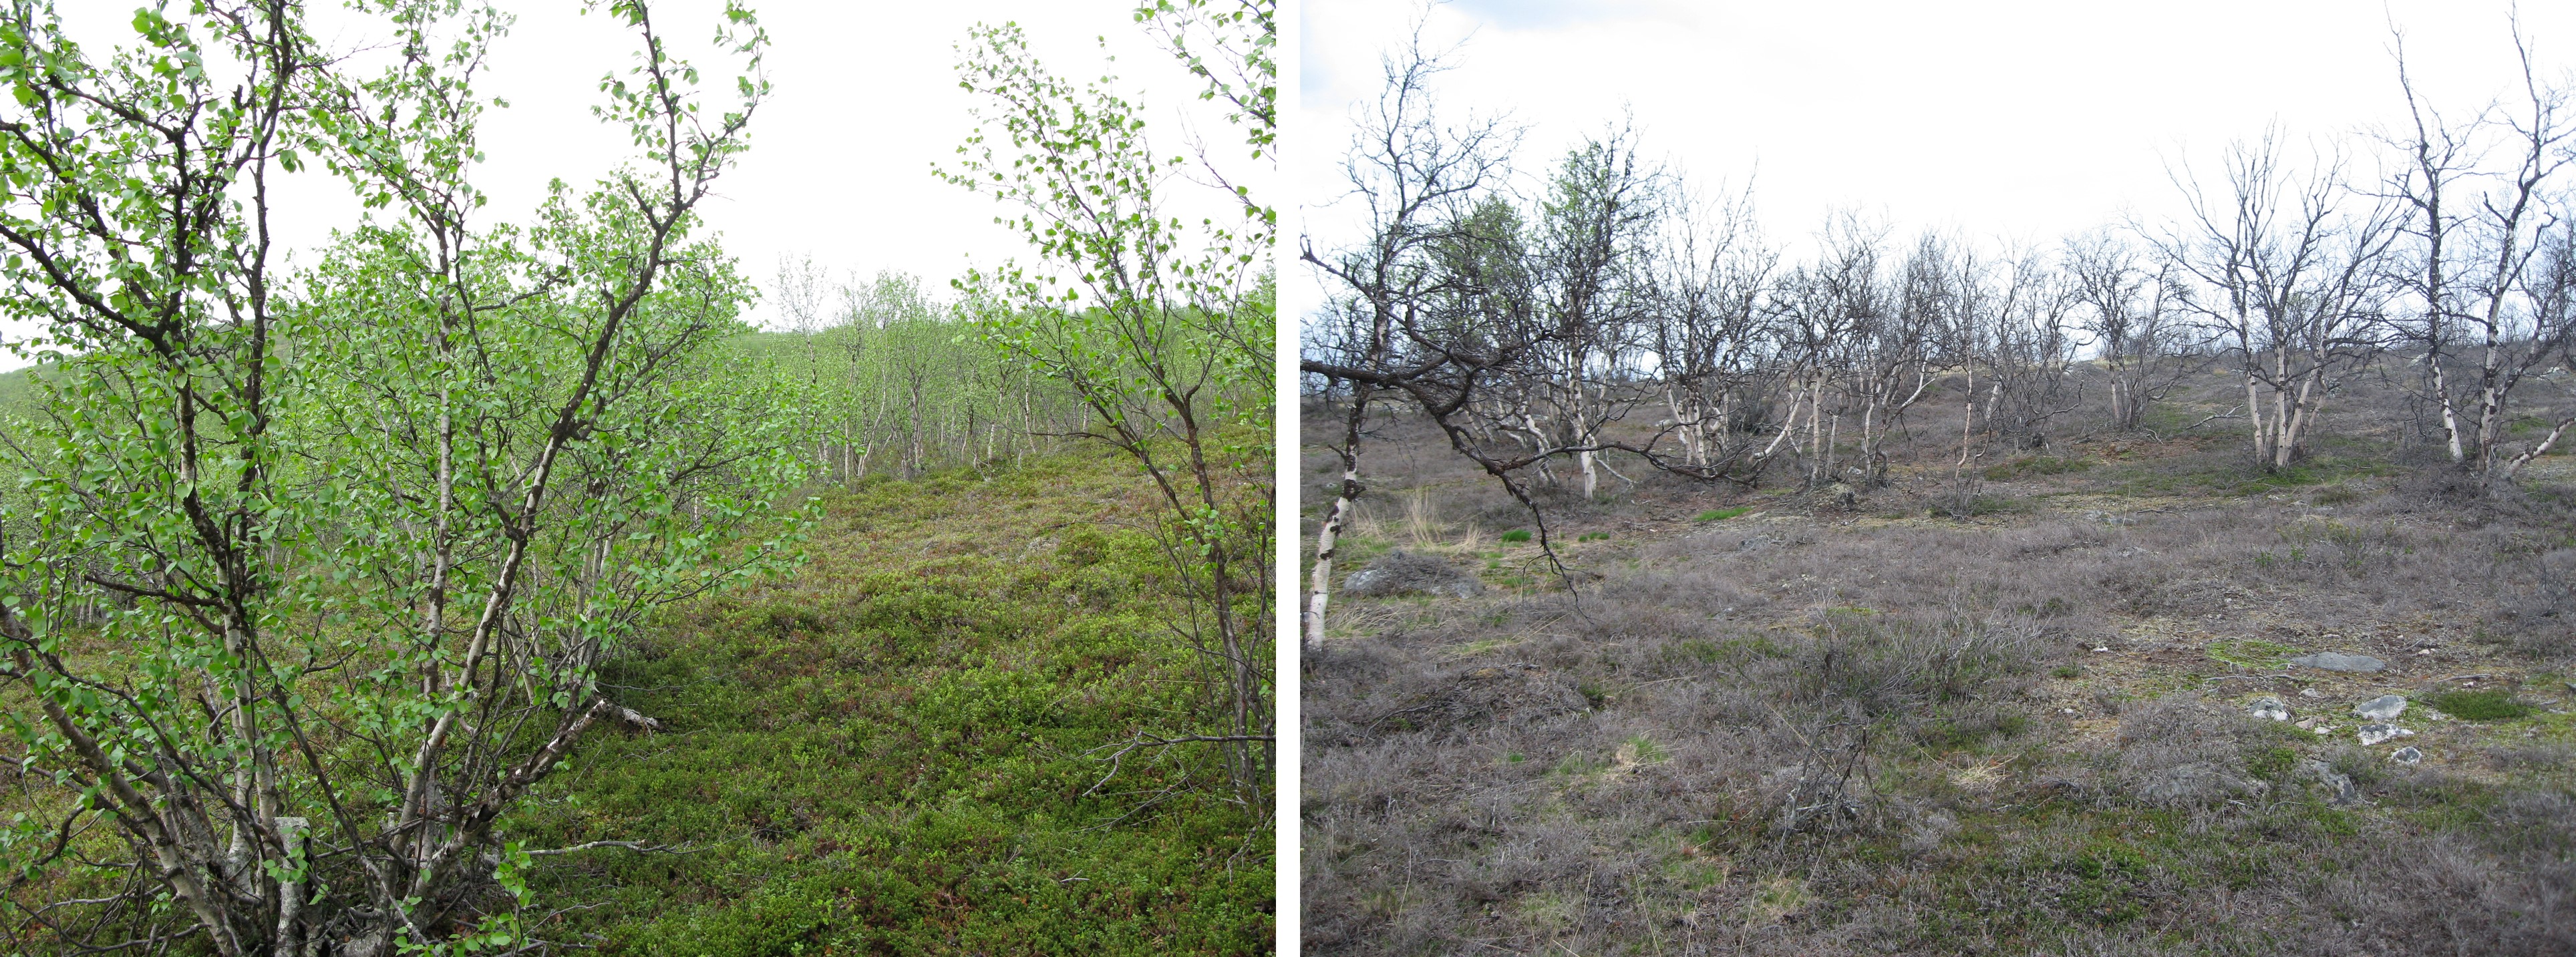 Photos illustrate the stations from undamaged (left) and defoliated (right) forests. Photo: Ole Petter Laksforsmo Vindstad